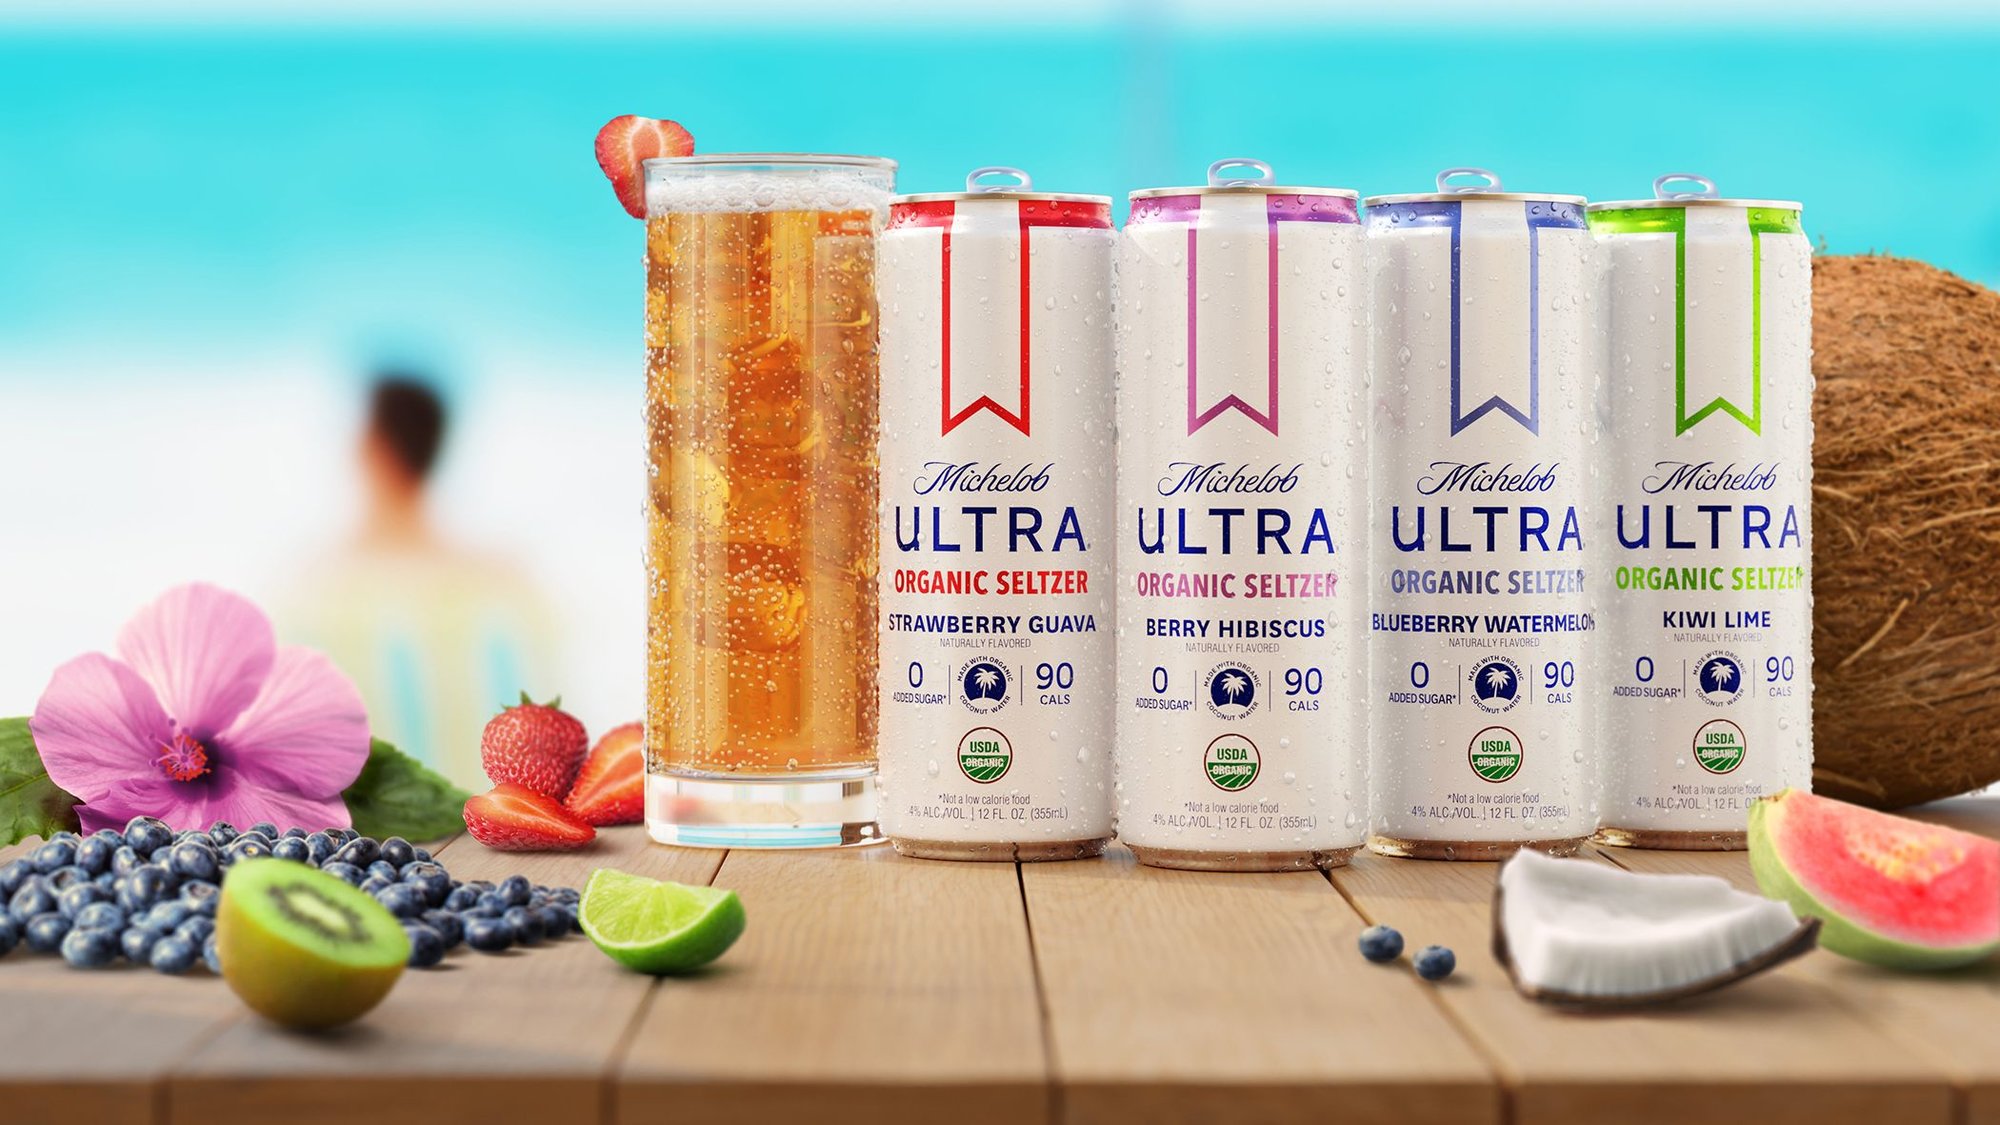 This is the main background for the Michelob Ultra Organic Seltzer Kiwi Lime